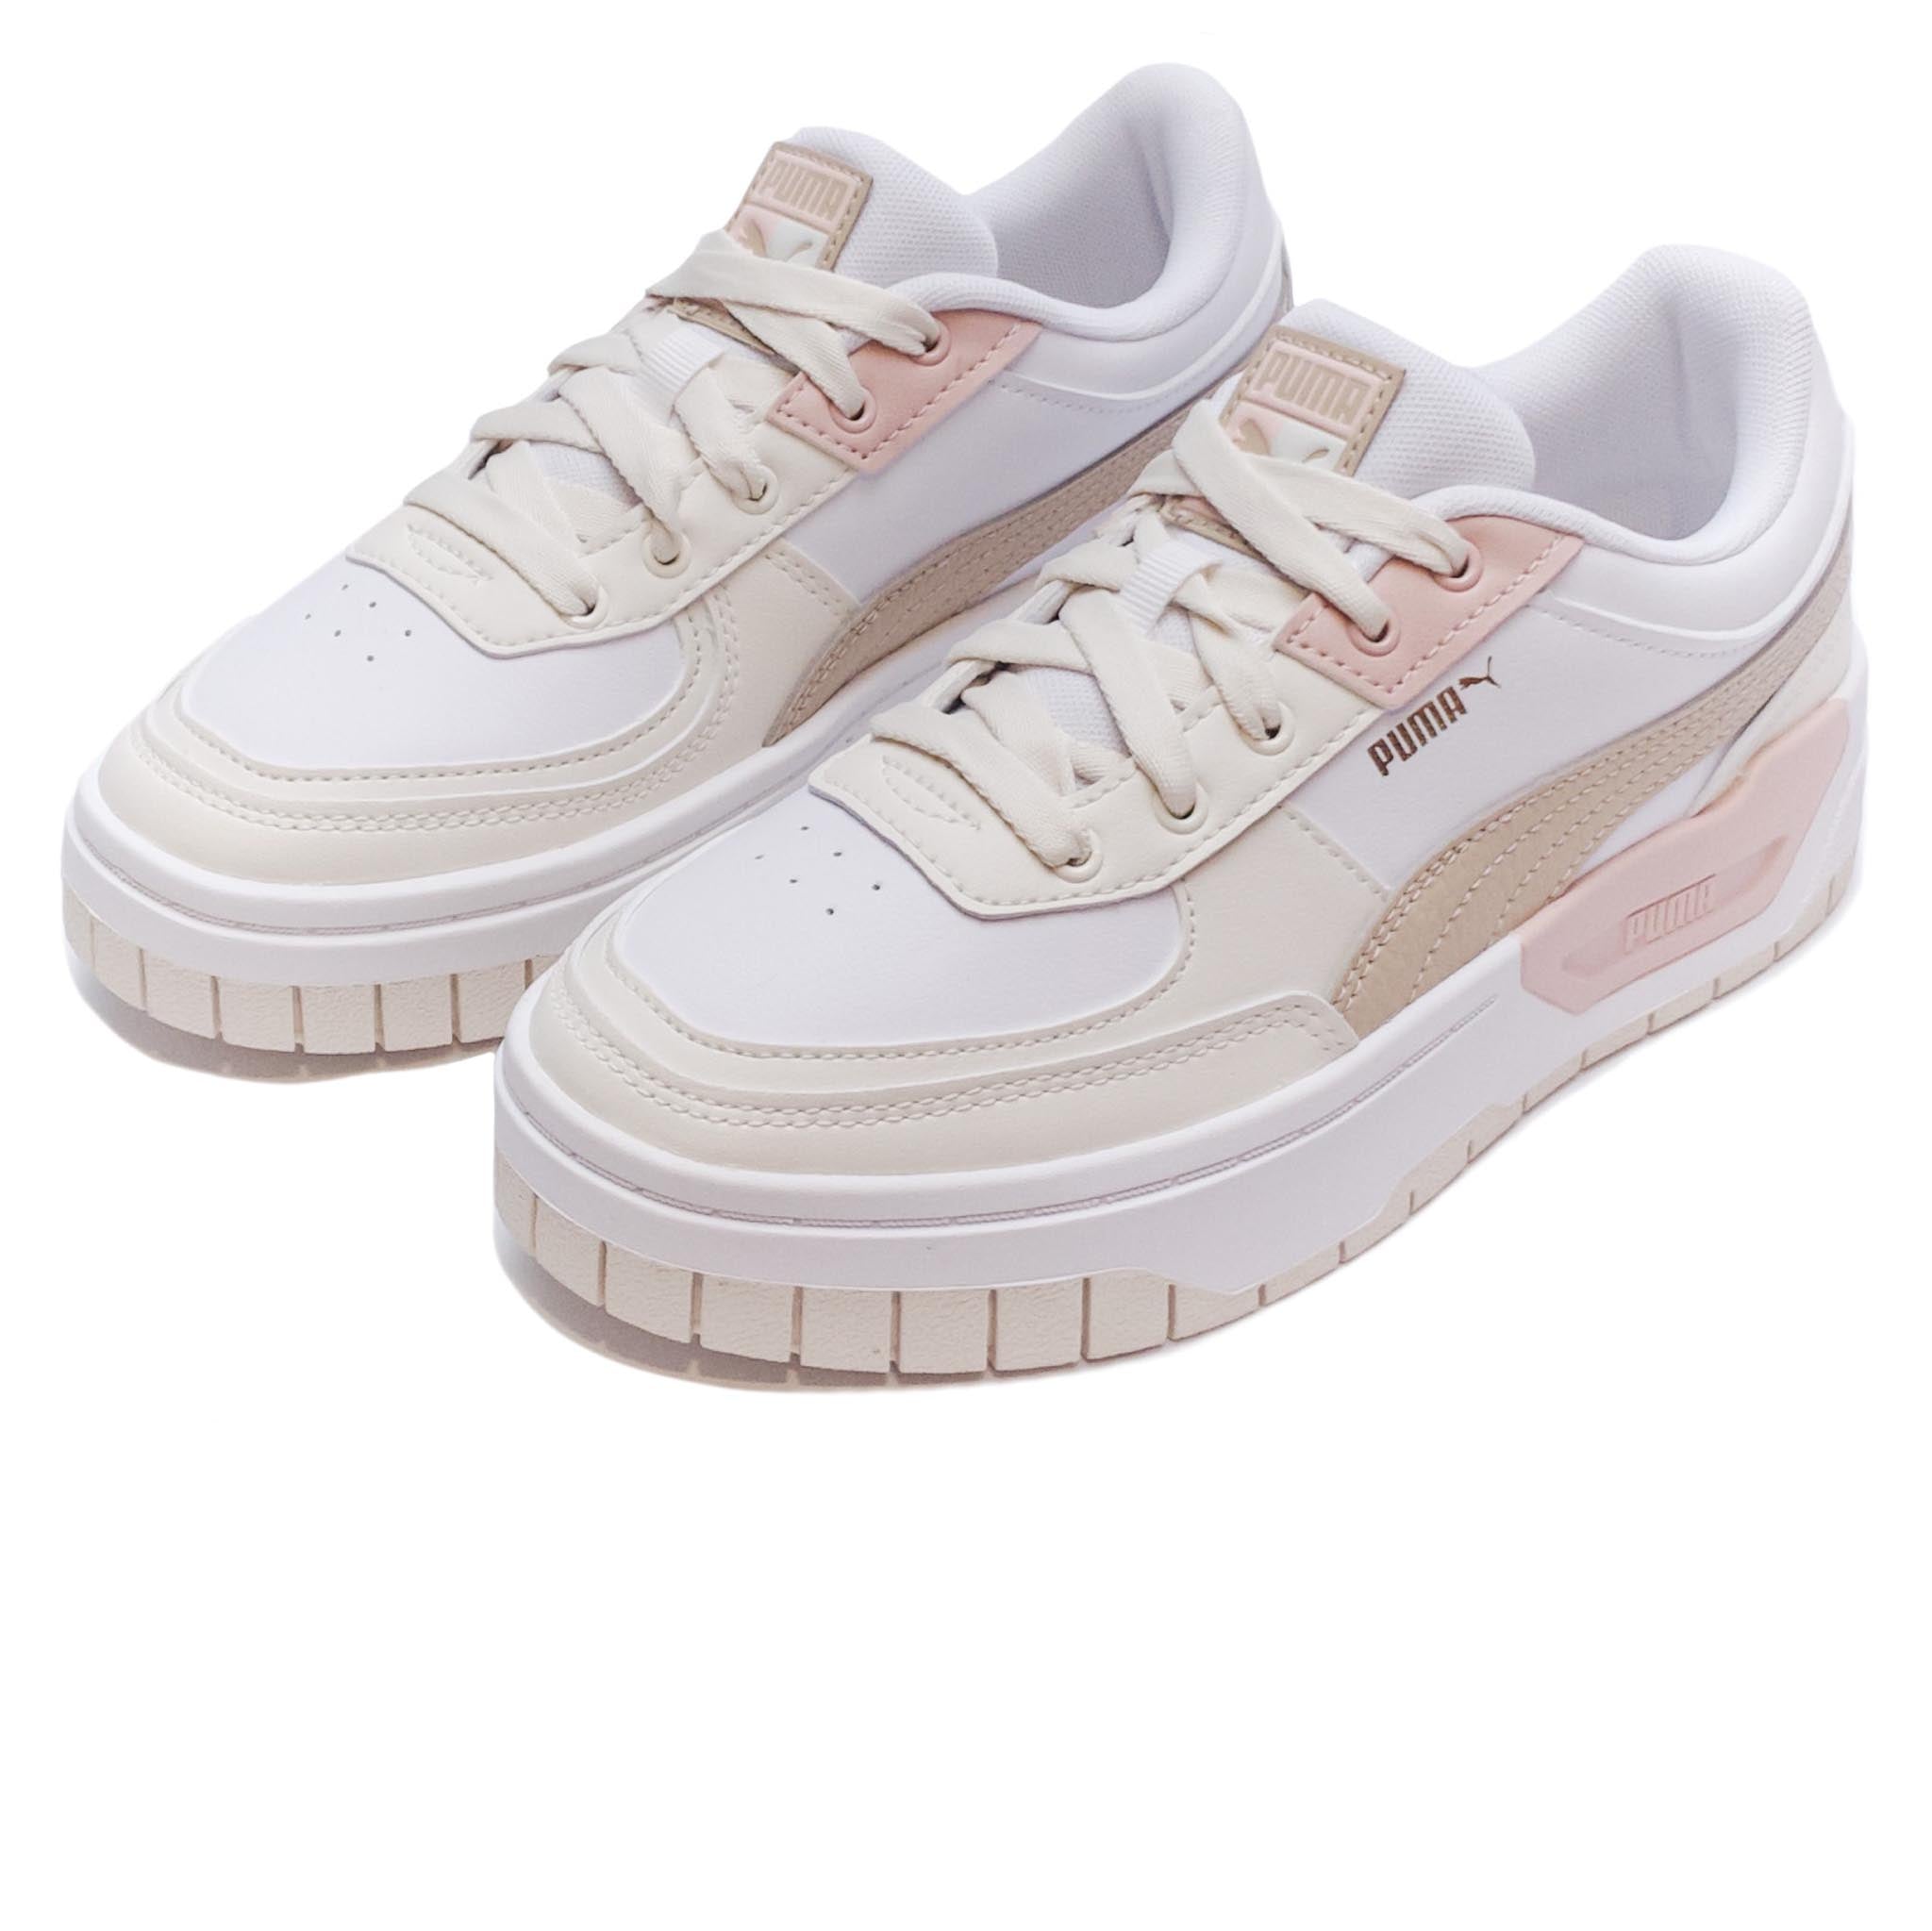 Puma Cali Dream Leather Frosted Ivory/White